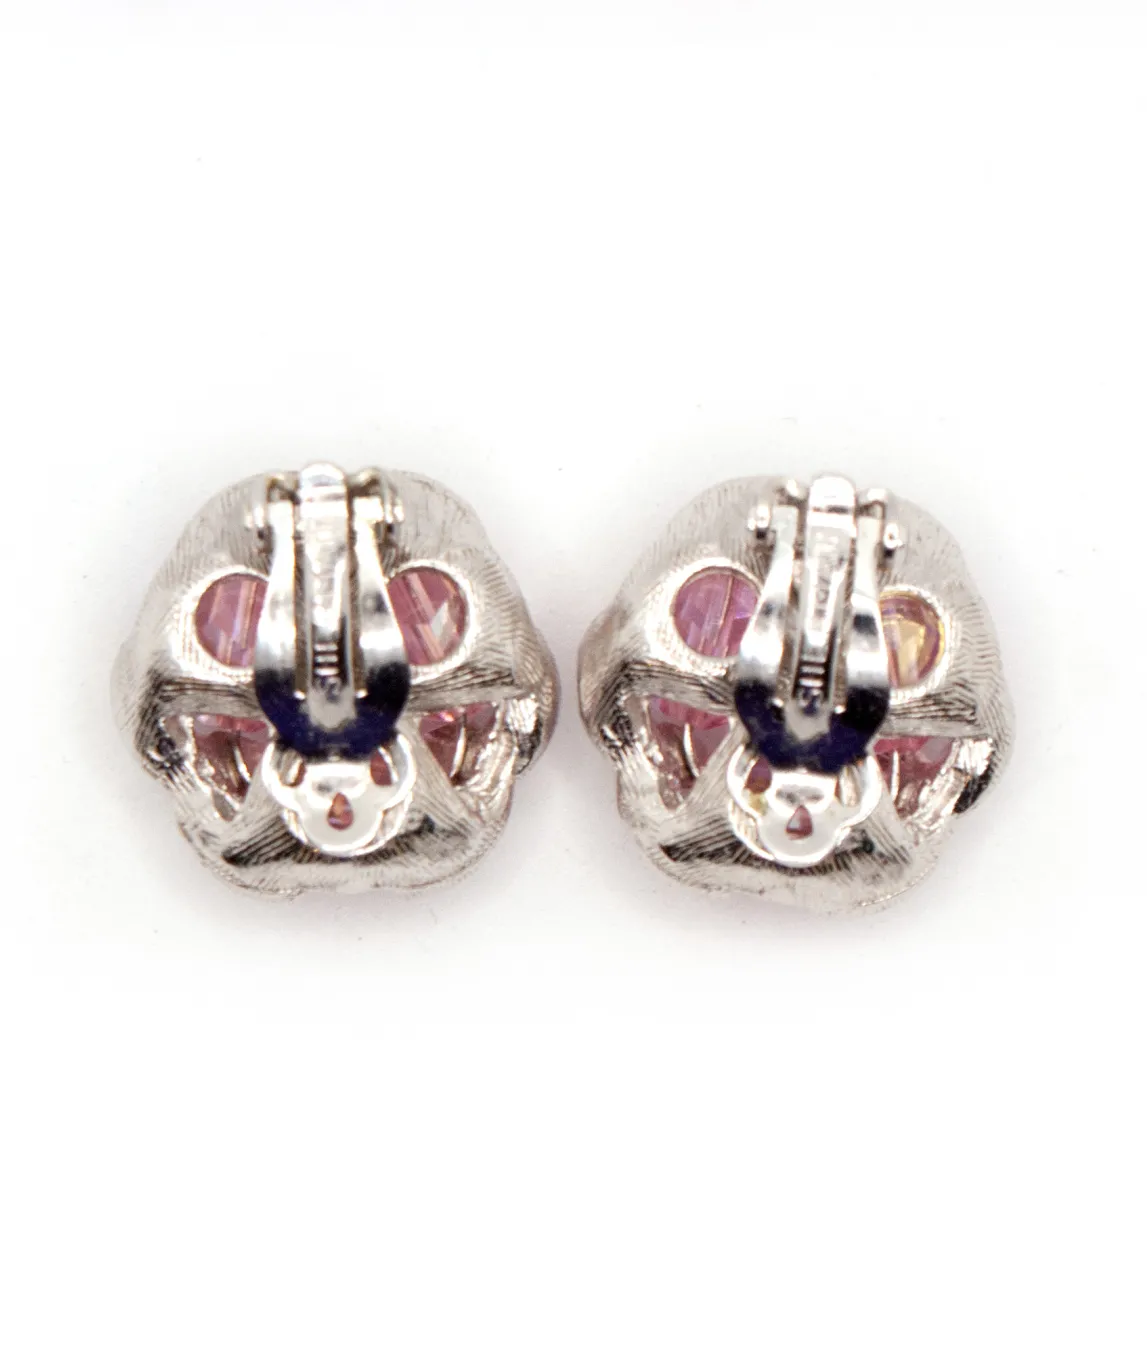 Back of vintage clip on earrings silver tone with pink visible